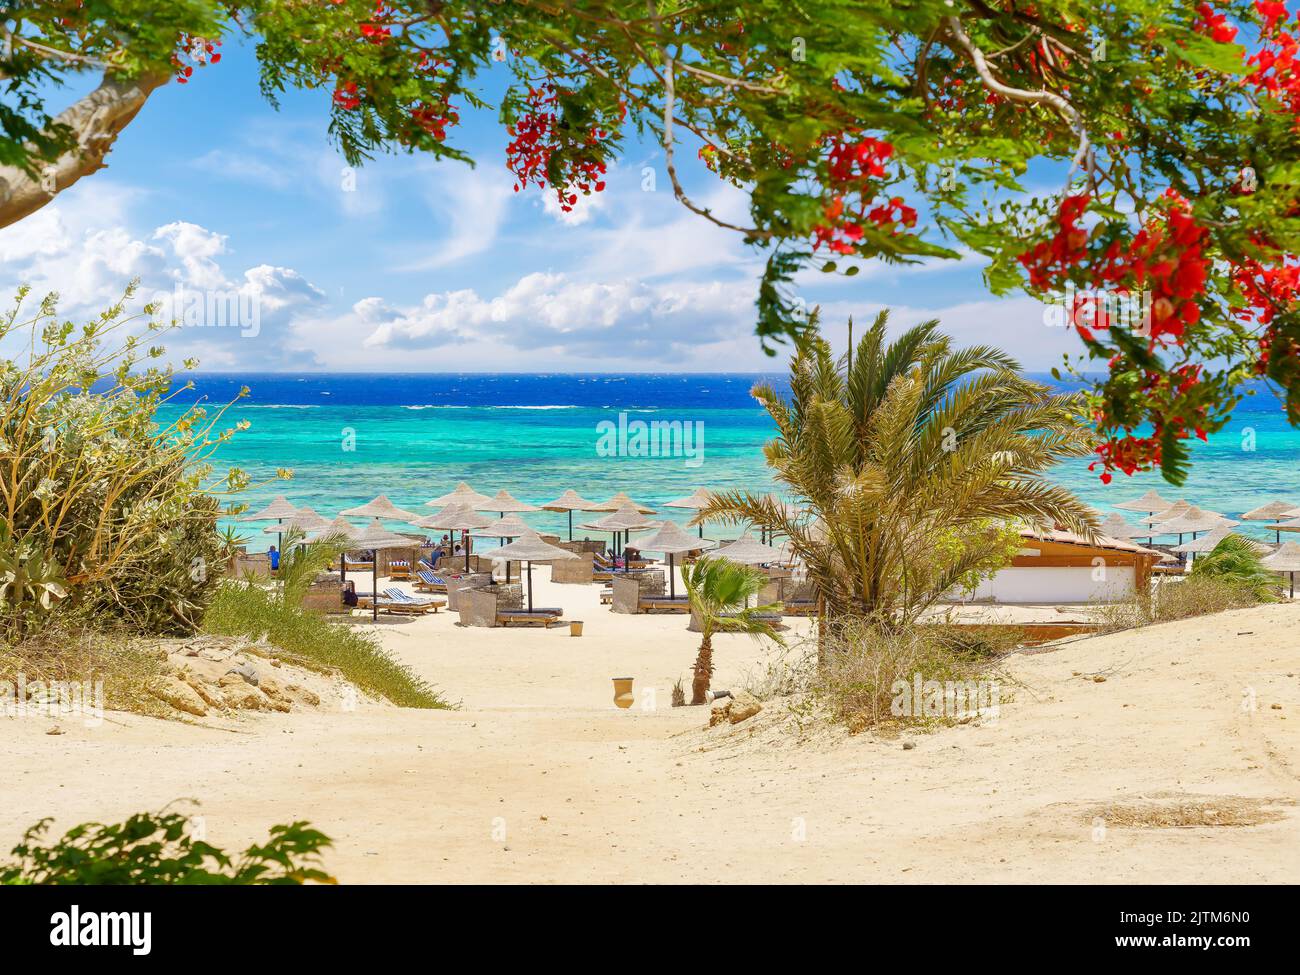 Landscape with amazing beach and Red Sea, Egypt Stock Photo